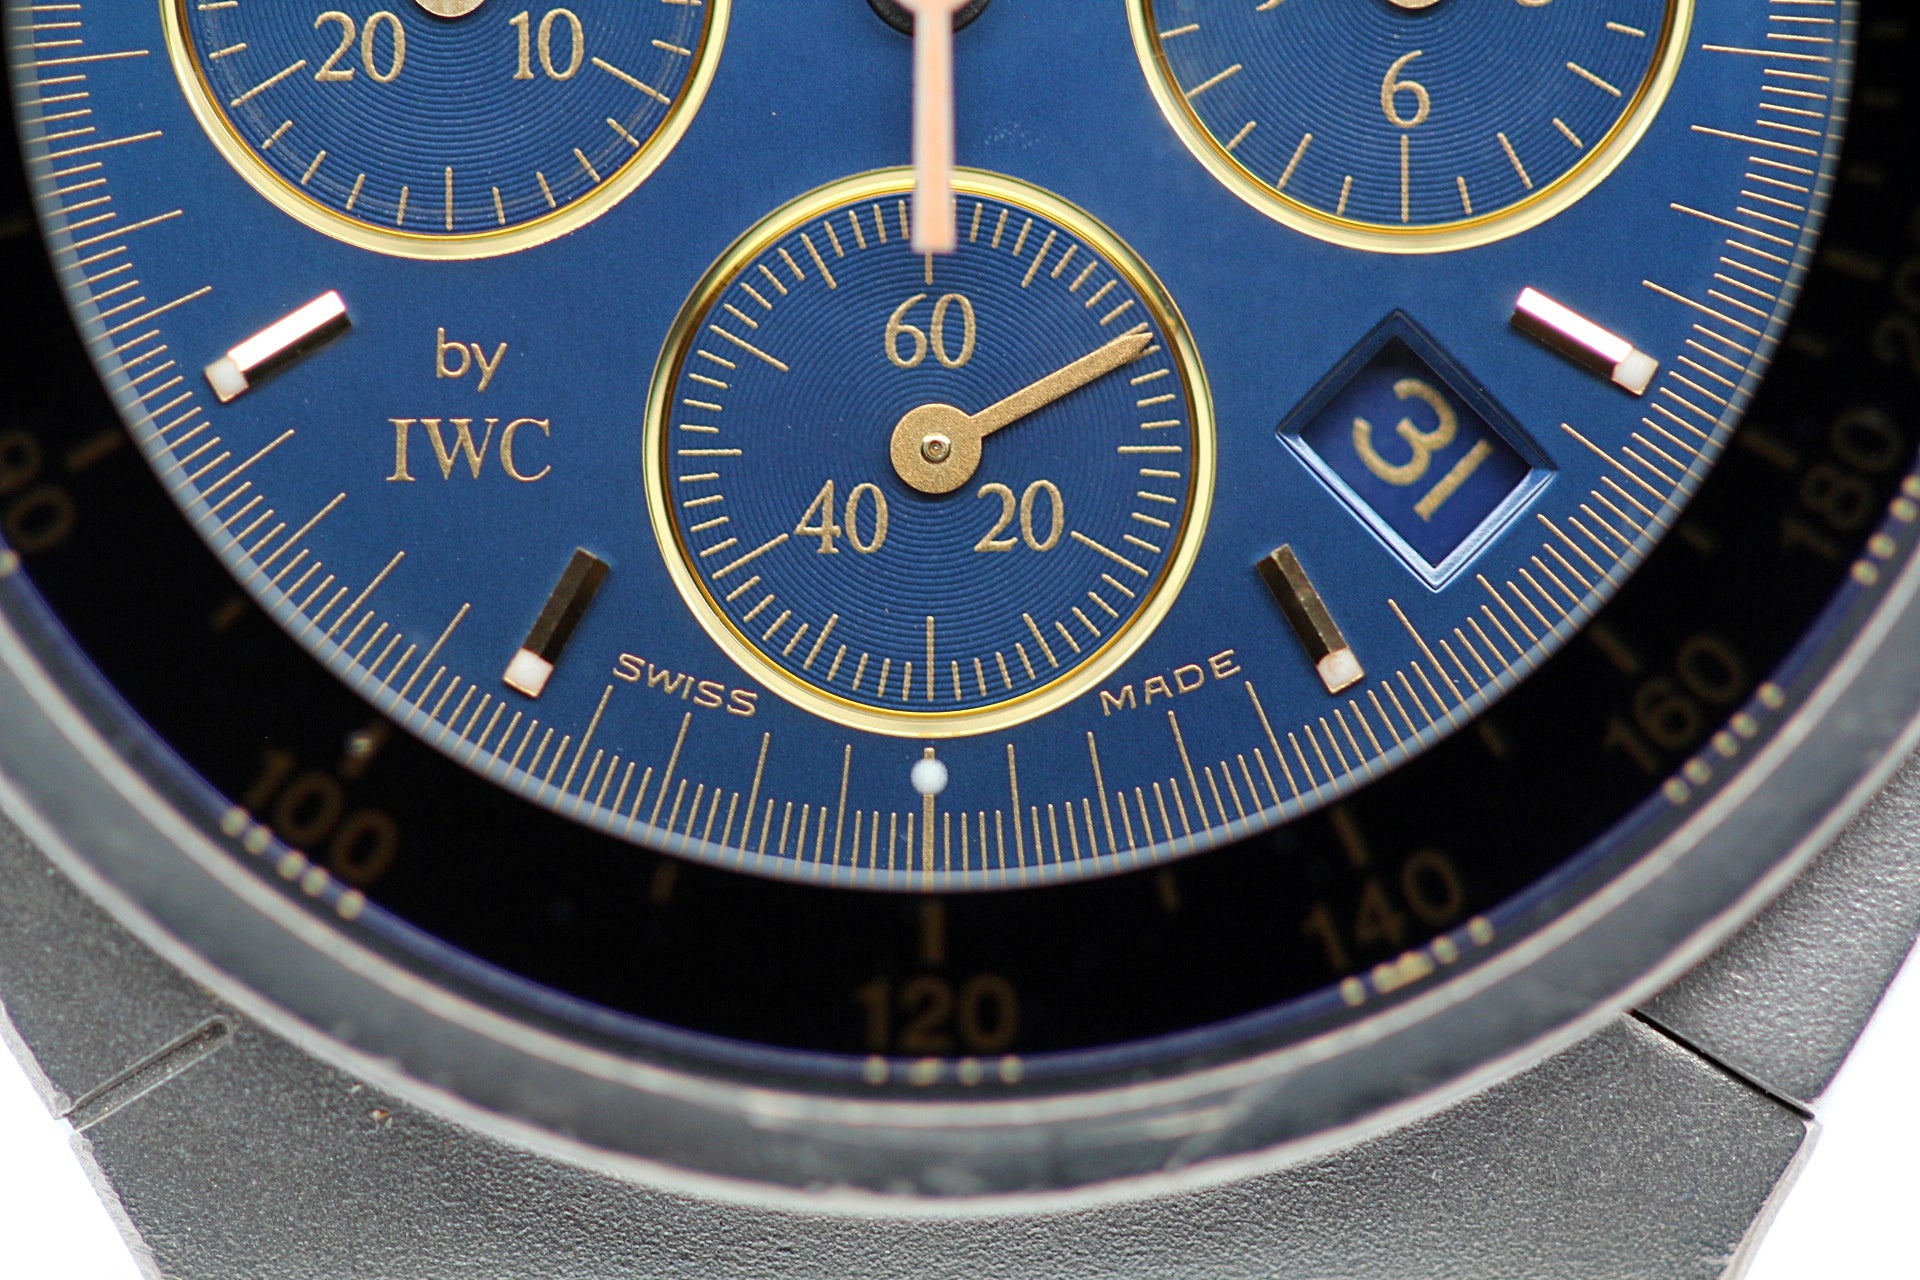 PORSCHE DESIGN BY IWC<br> Chronograph with moon phase 